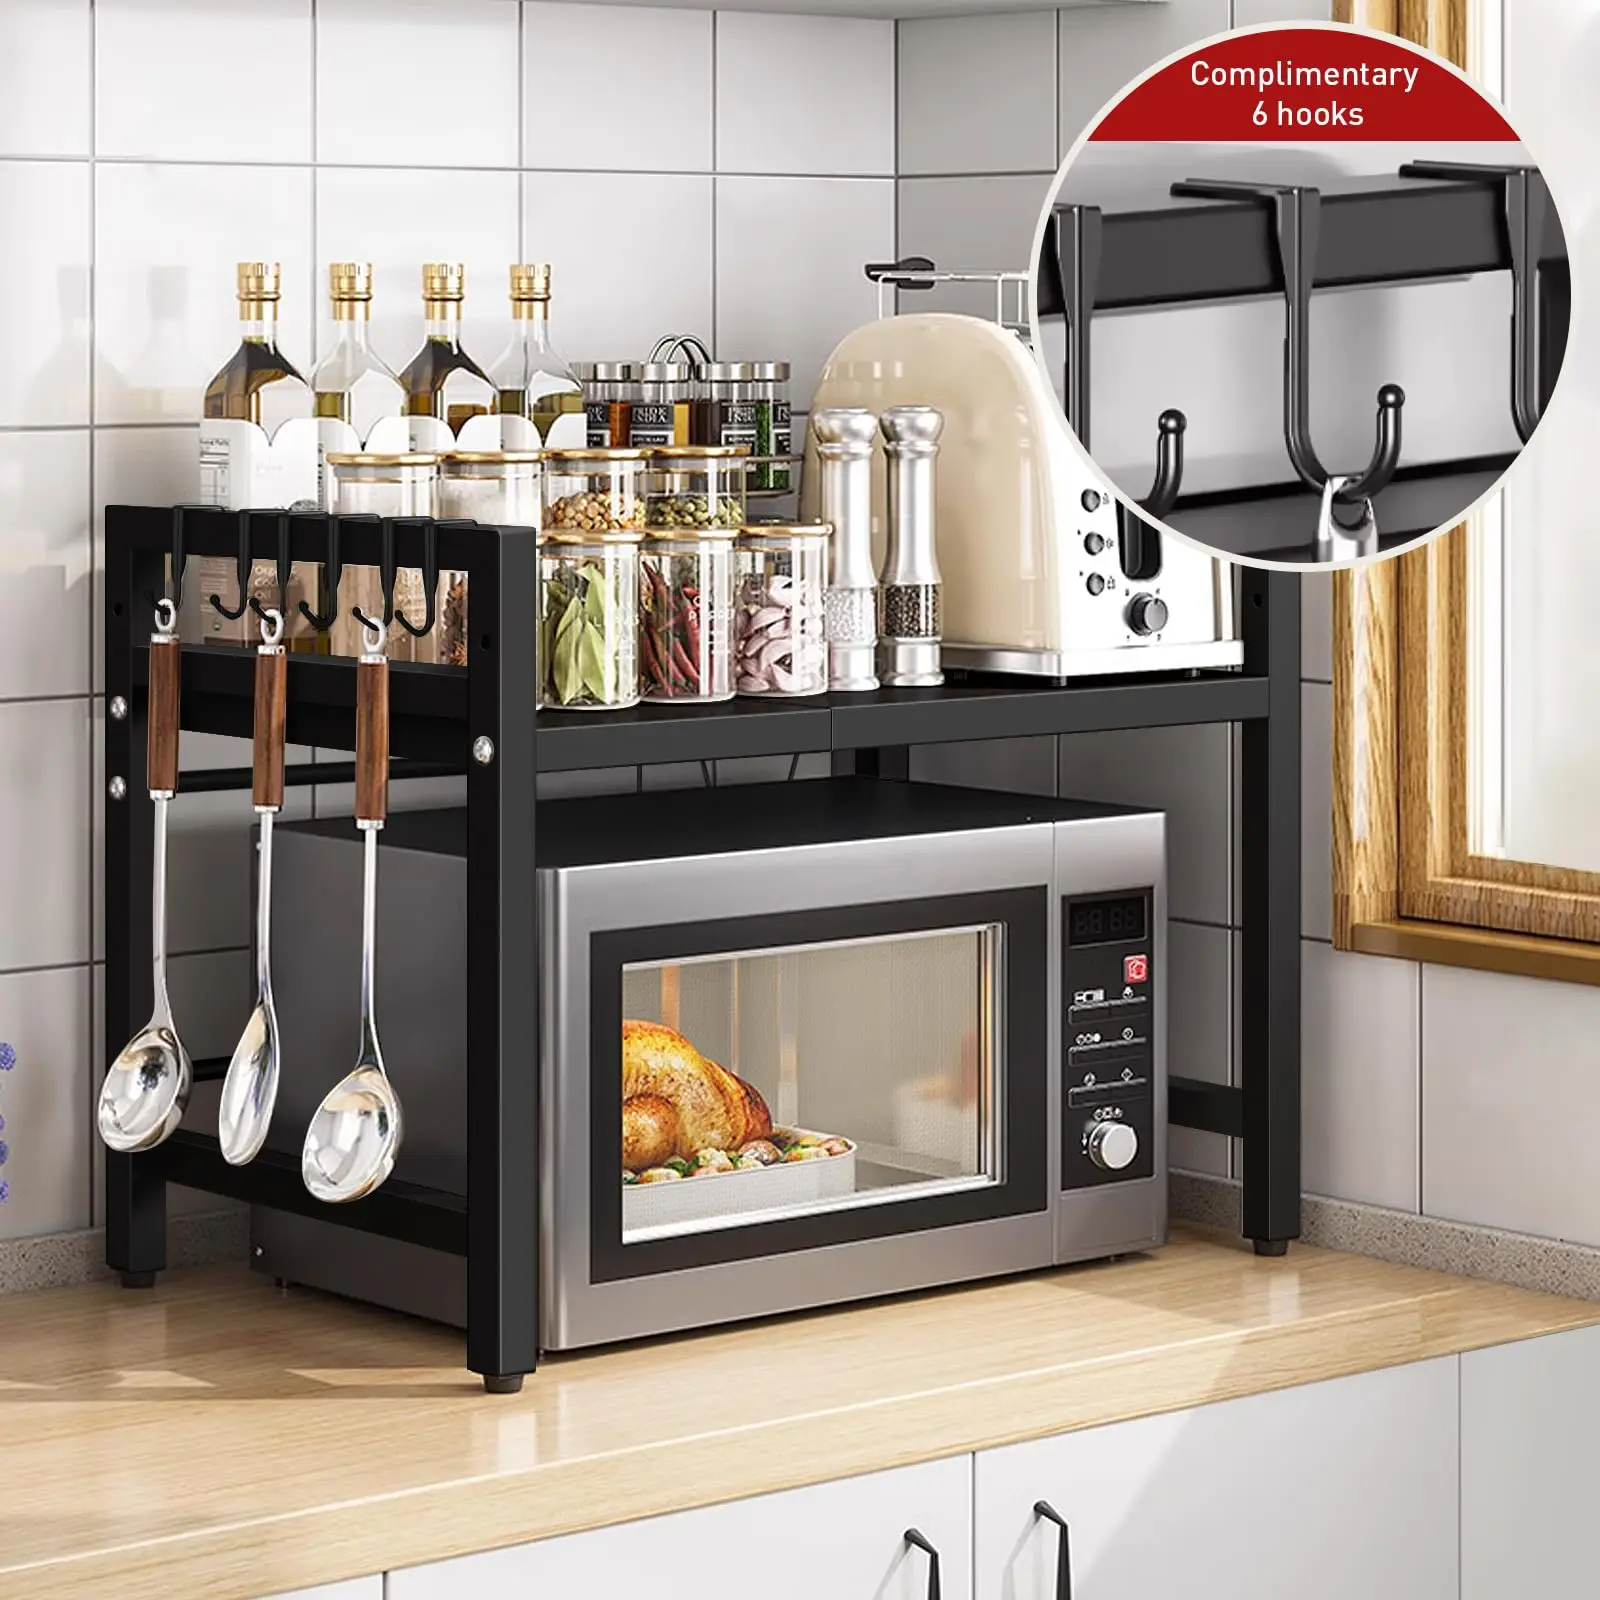 https://ae01.alicdn.com/kf/Sfea40f686356445892f895e906f3f57cr/2023-New-Microwave-Oven-Rack-Adjustable-Microwave-Shelf-with-Hooks-Kitchen-Microwave-Stand-with-Storage-Durable.jpg